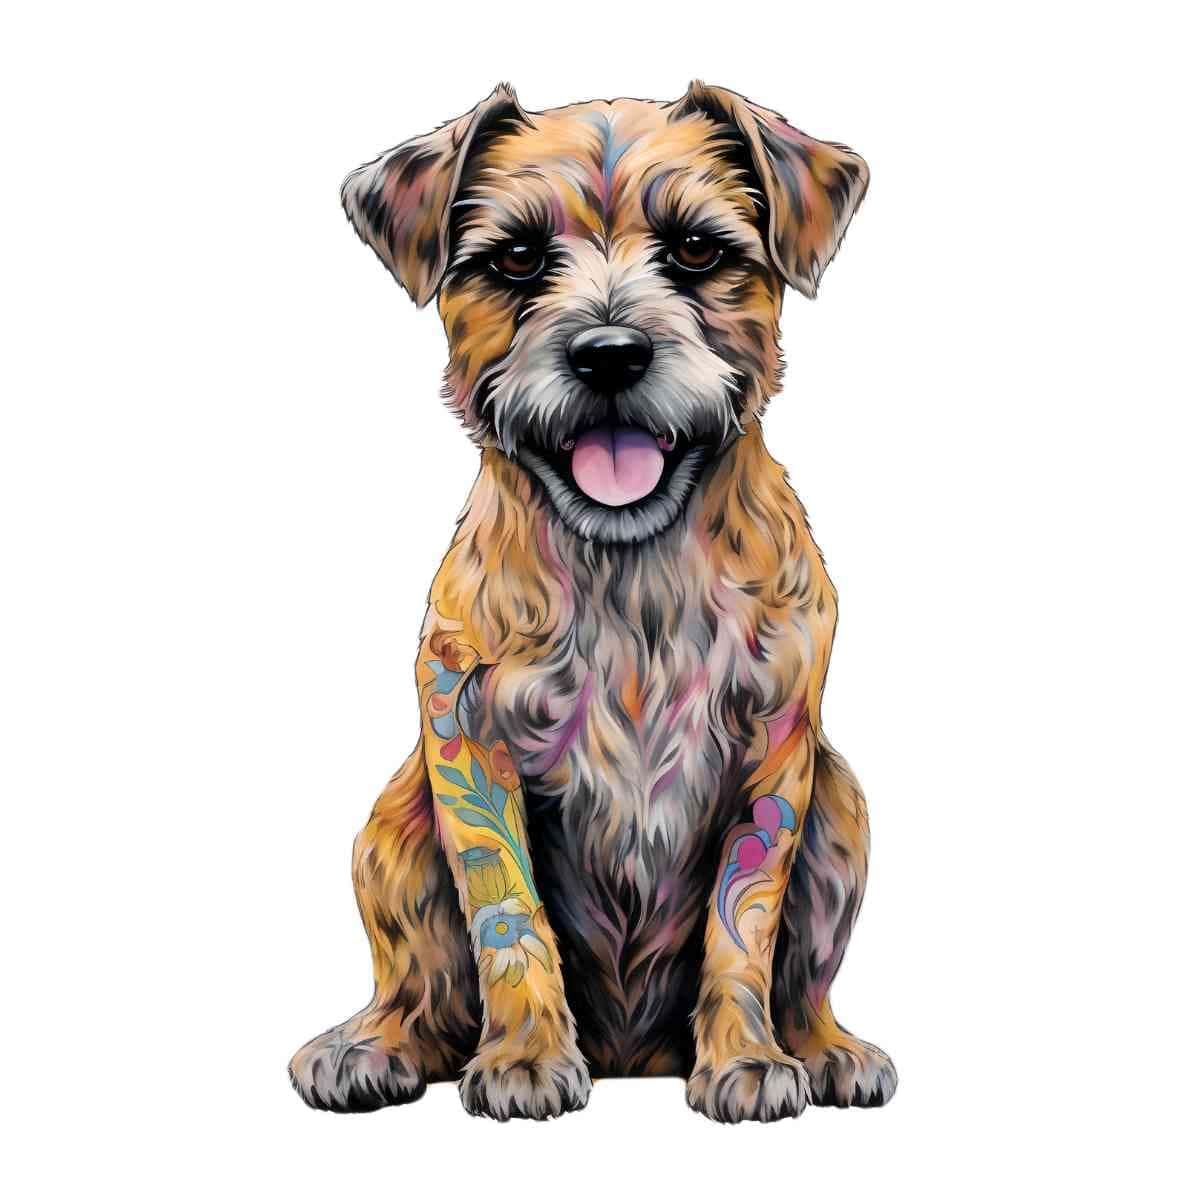 Animal Jigsaw Puzzle > Wooden Jigsaw Puzzle > Jigsaw Puzzle A3 Border Terrier Dog - Jigsaw Puzzle